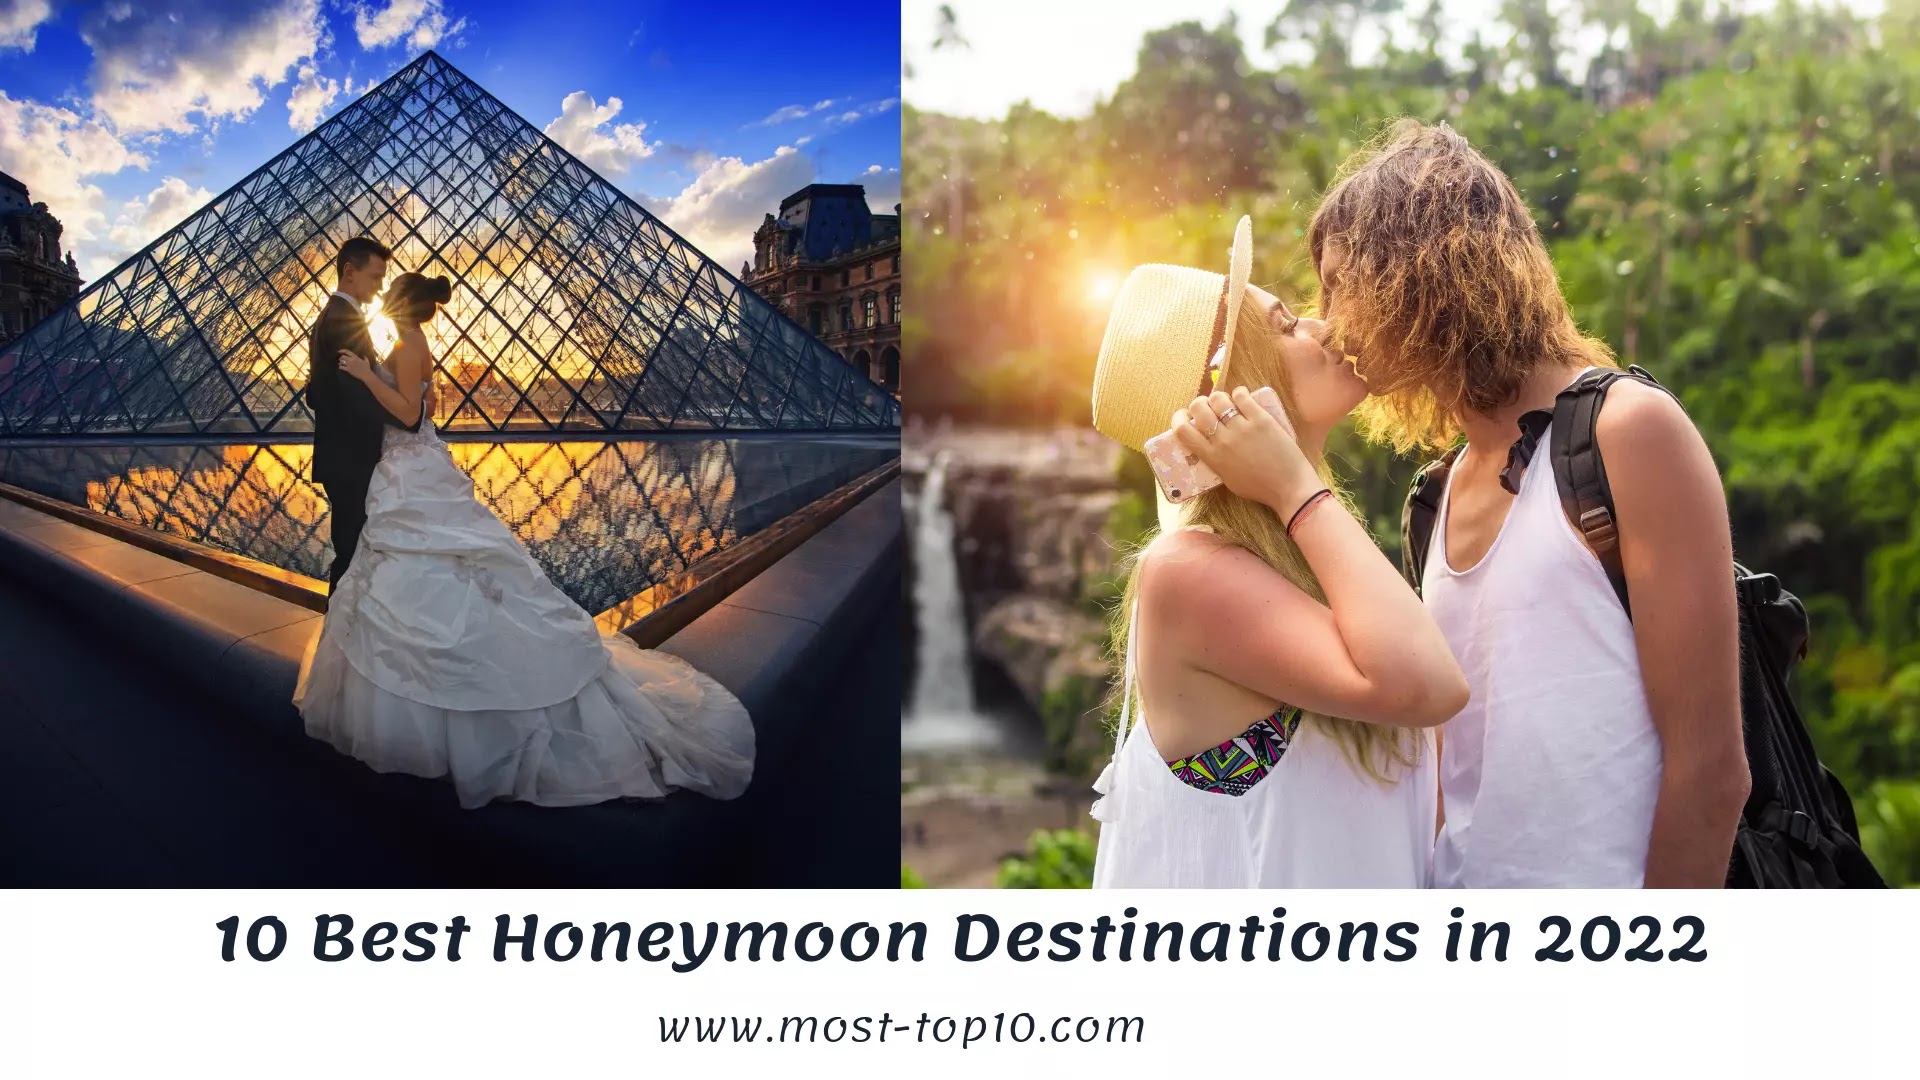 Best Honeymoon Destinations on Budget 2020 Best Holiday Beaches in 2022 Best Exotic Honeymoon Concepts in 2022.